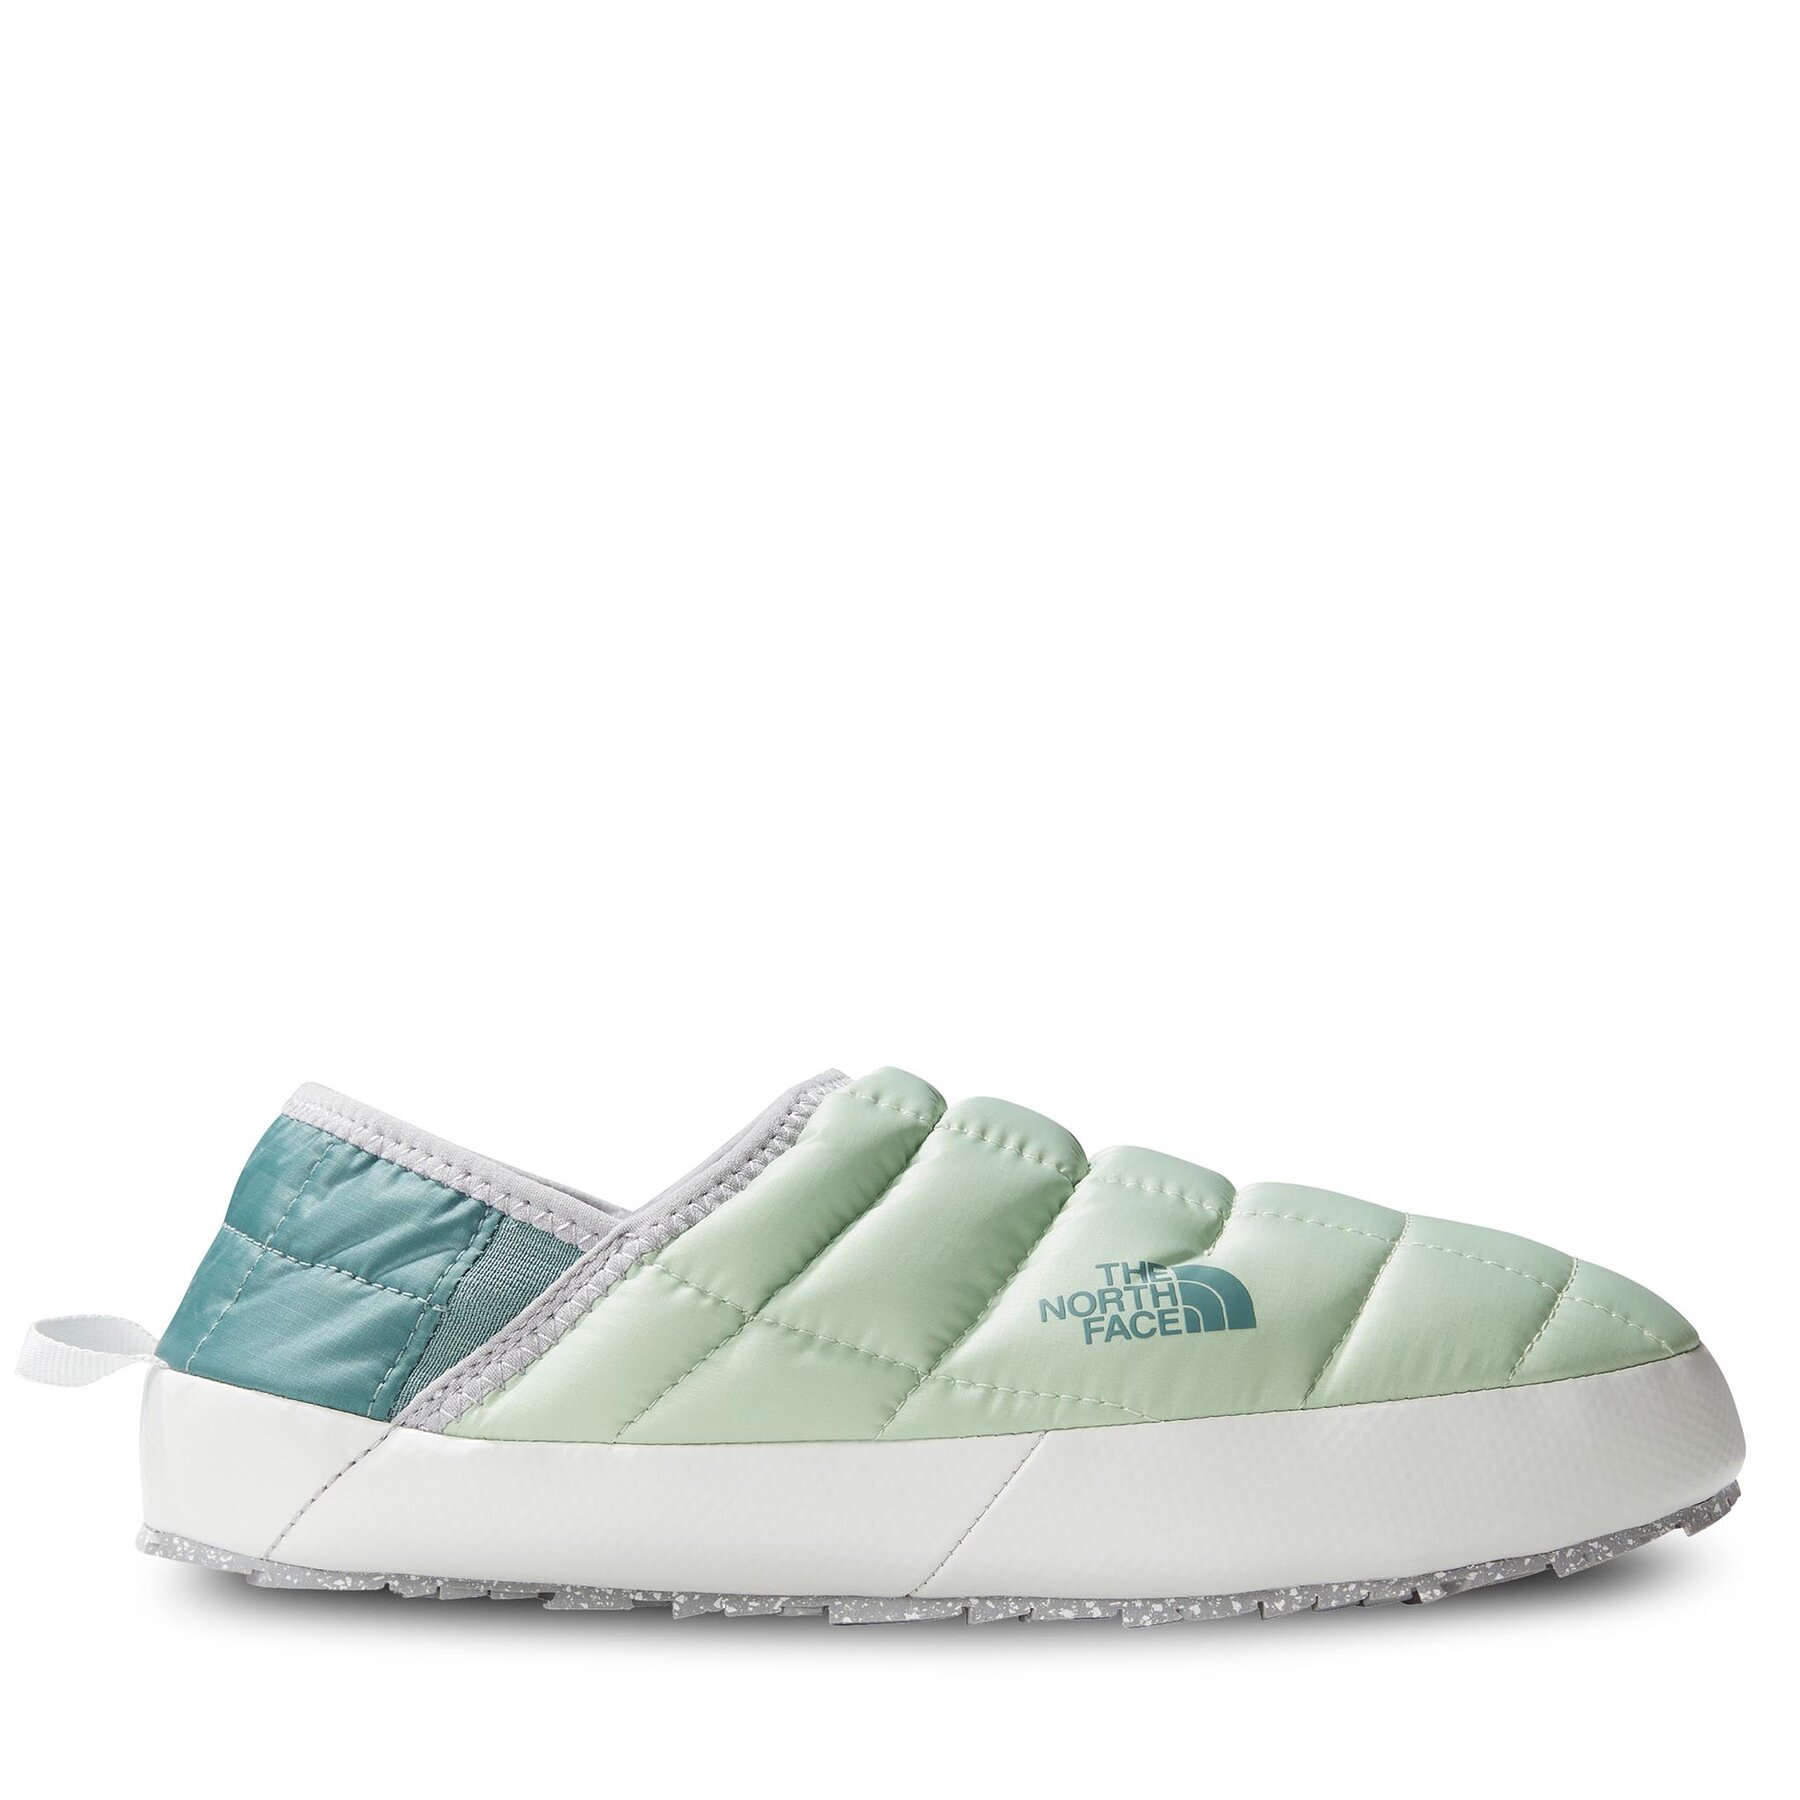 Comprar en oferta The North Face Women's ThermoBall Traction Mule V misty sage/dark sage